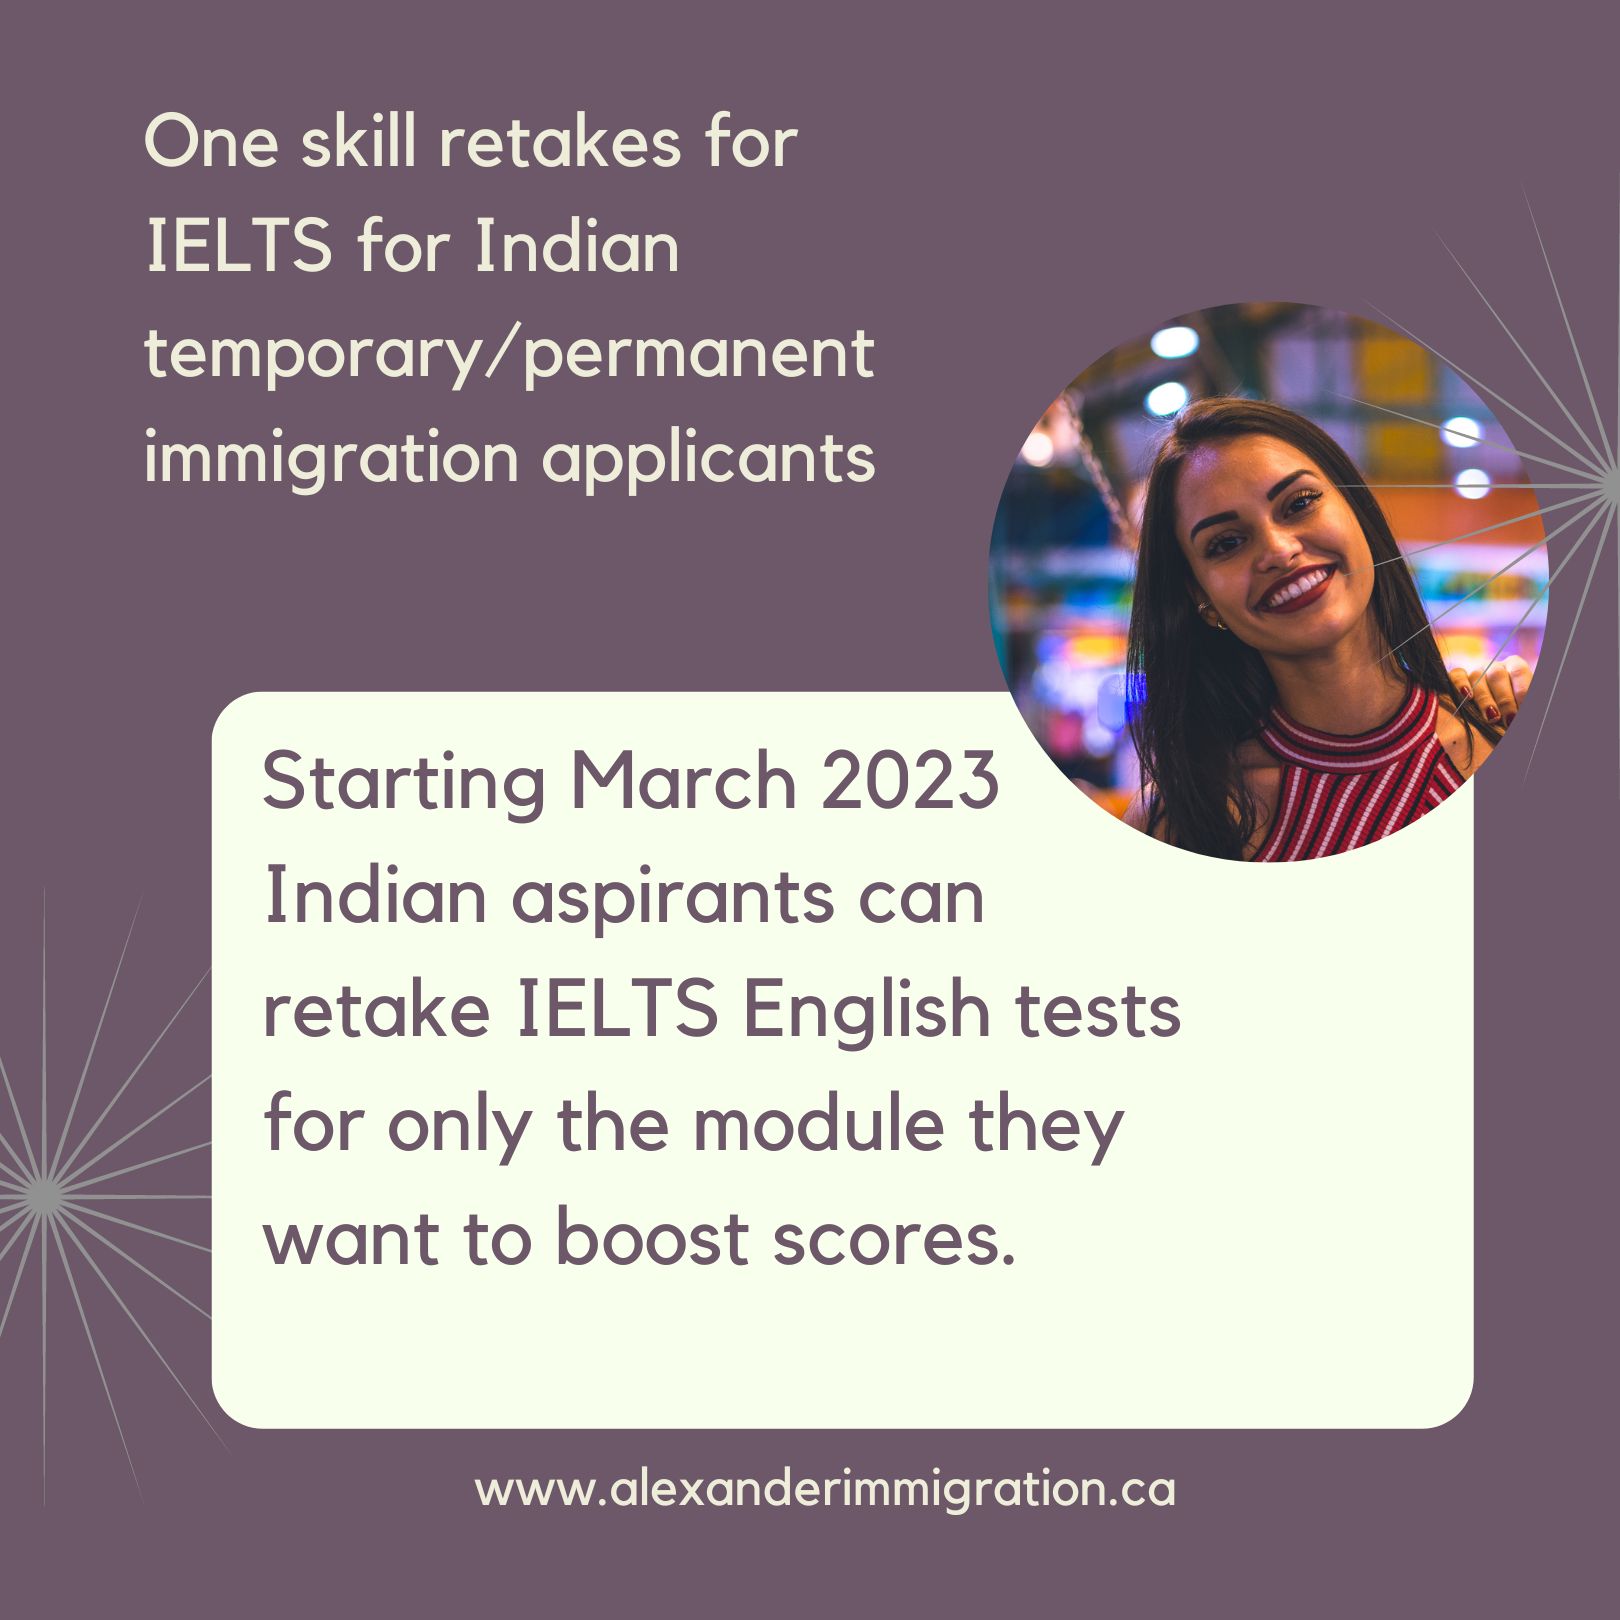 One skill retakes for IELTS for Indian temporary/permanent immigration applicants